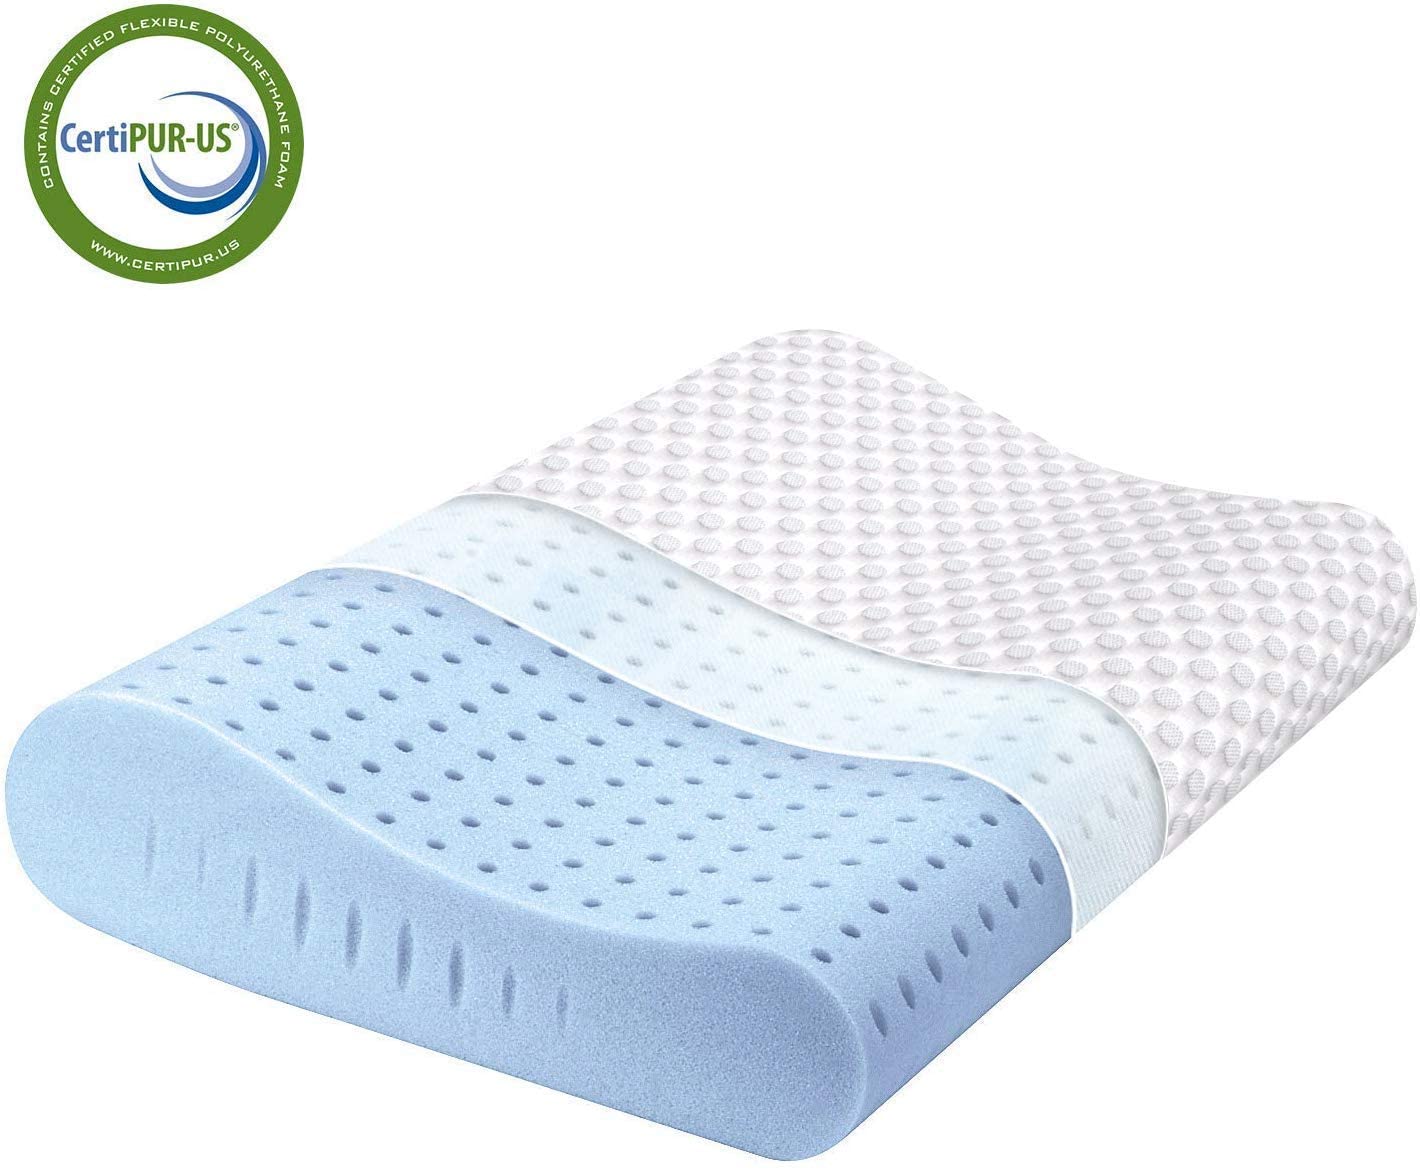 Milemont Cervical Memory Foam Pillow For Stomach Sleepers